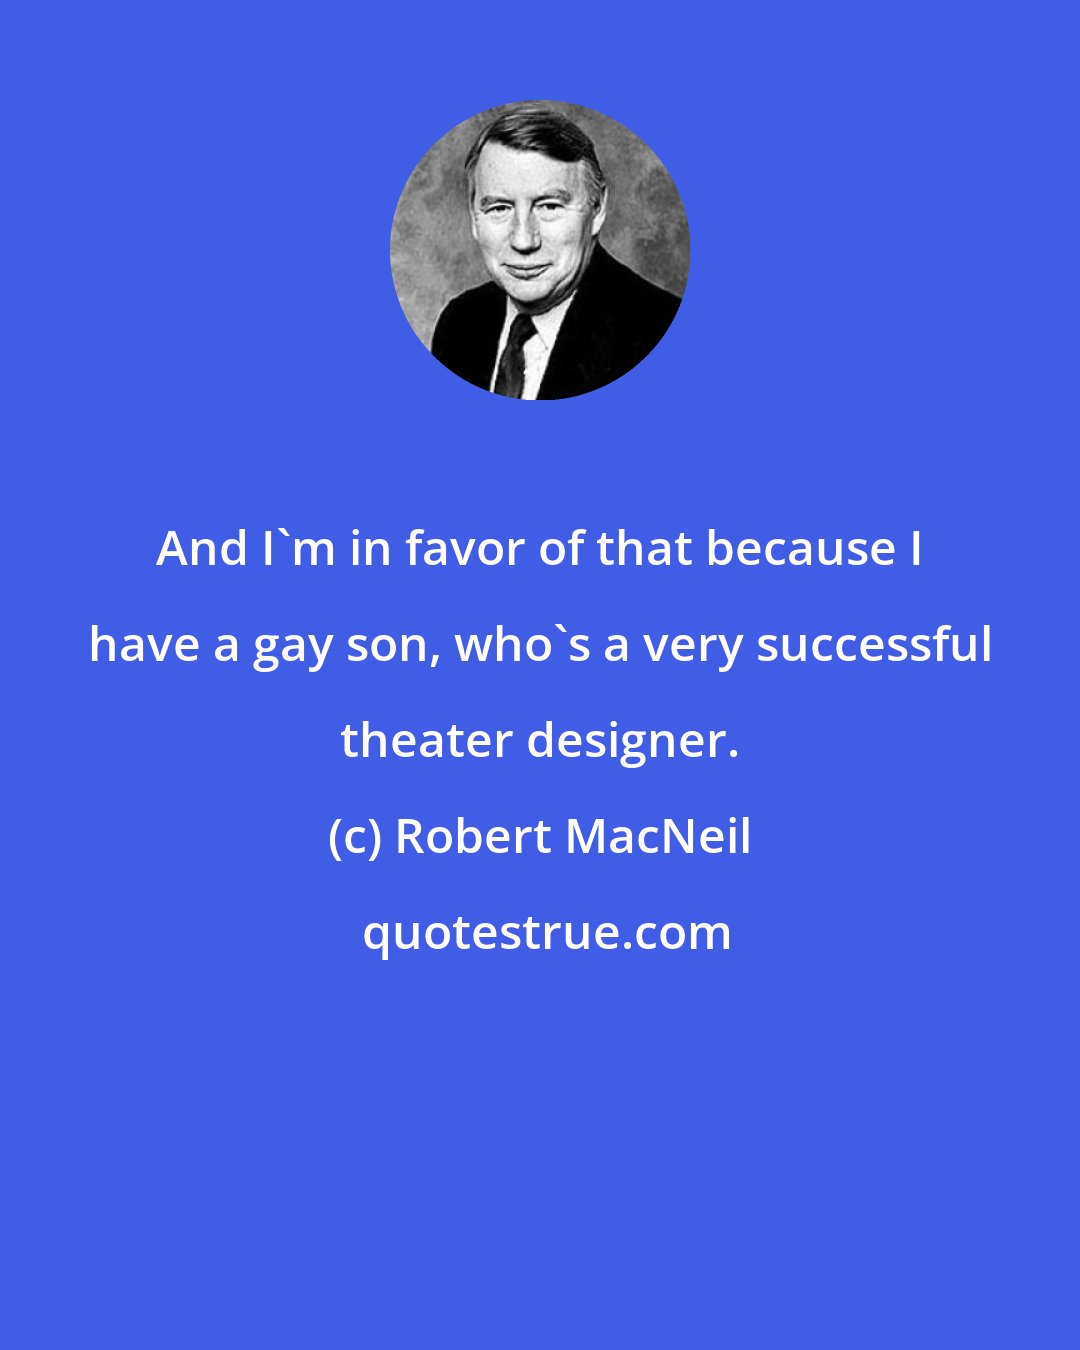 Robert MacNeil: And I'm in favor of that because I have a gay son, who's a very successful theater designer.